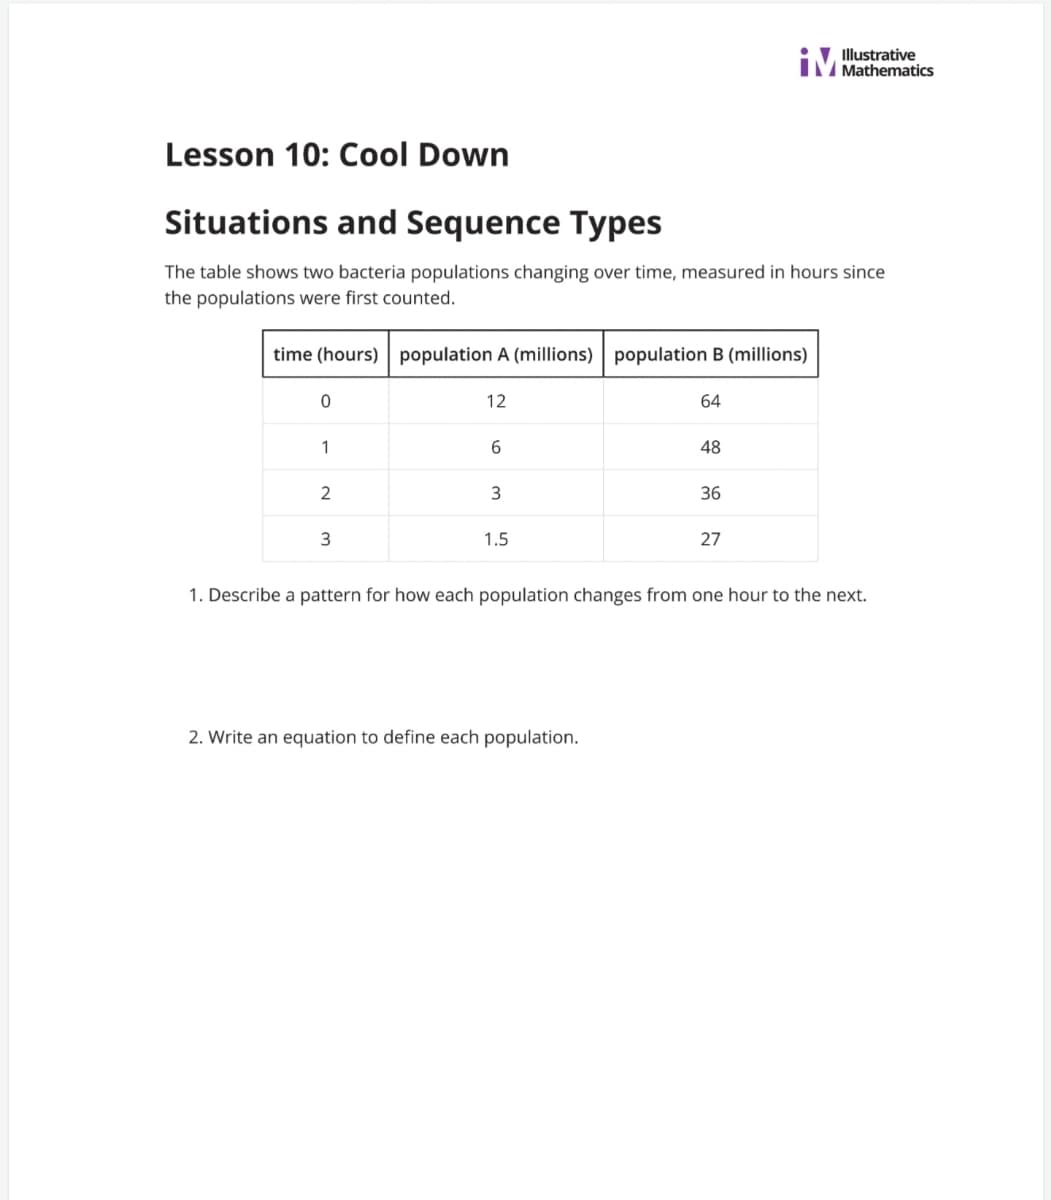 Illustrative
MMathematics
Lesson 10: Cool Down
Situations and Sequence Types
The table shows two bacteria populations changing over time, measured in hours since
the populations were first counted.
time (hours) population A (millions) population B (millions)
12
64
1
48
2
36
1.5
27
1. Describe a pattern for how each population changes from one hour to the next.
2. Write an equation to define each population.
